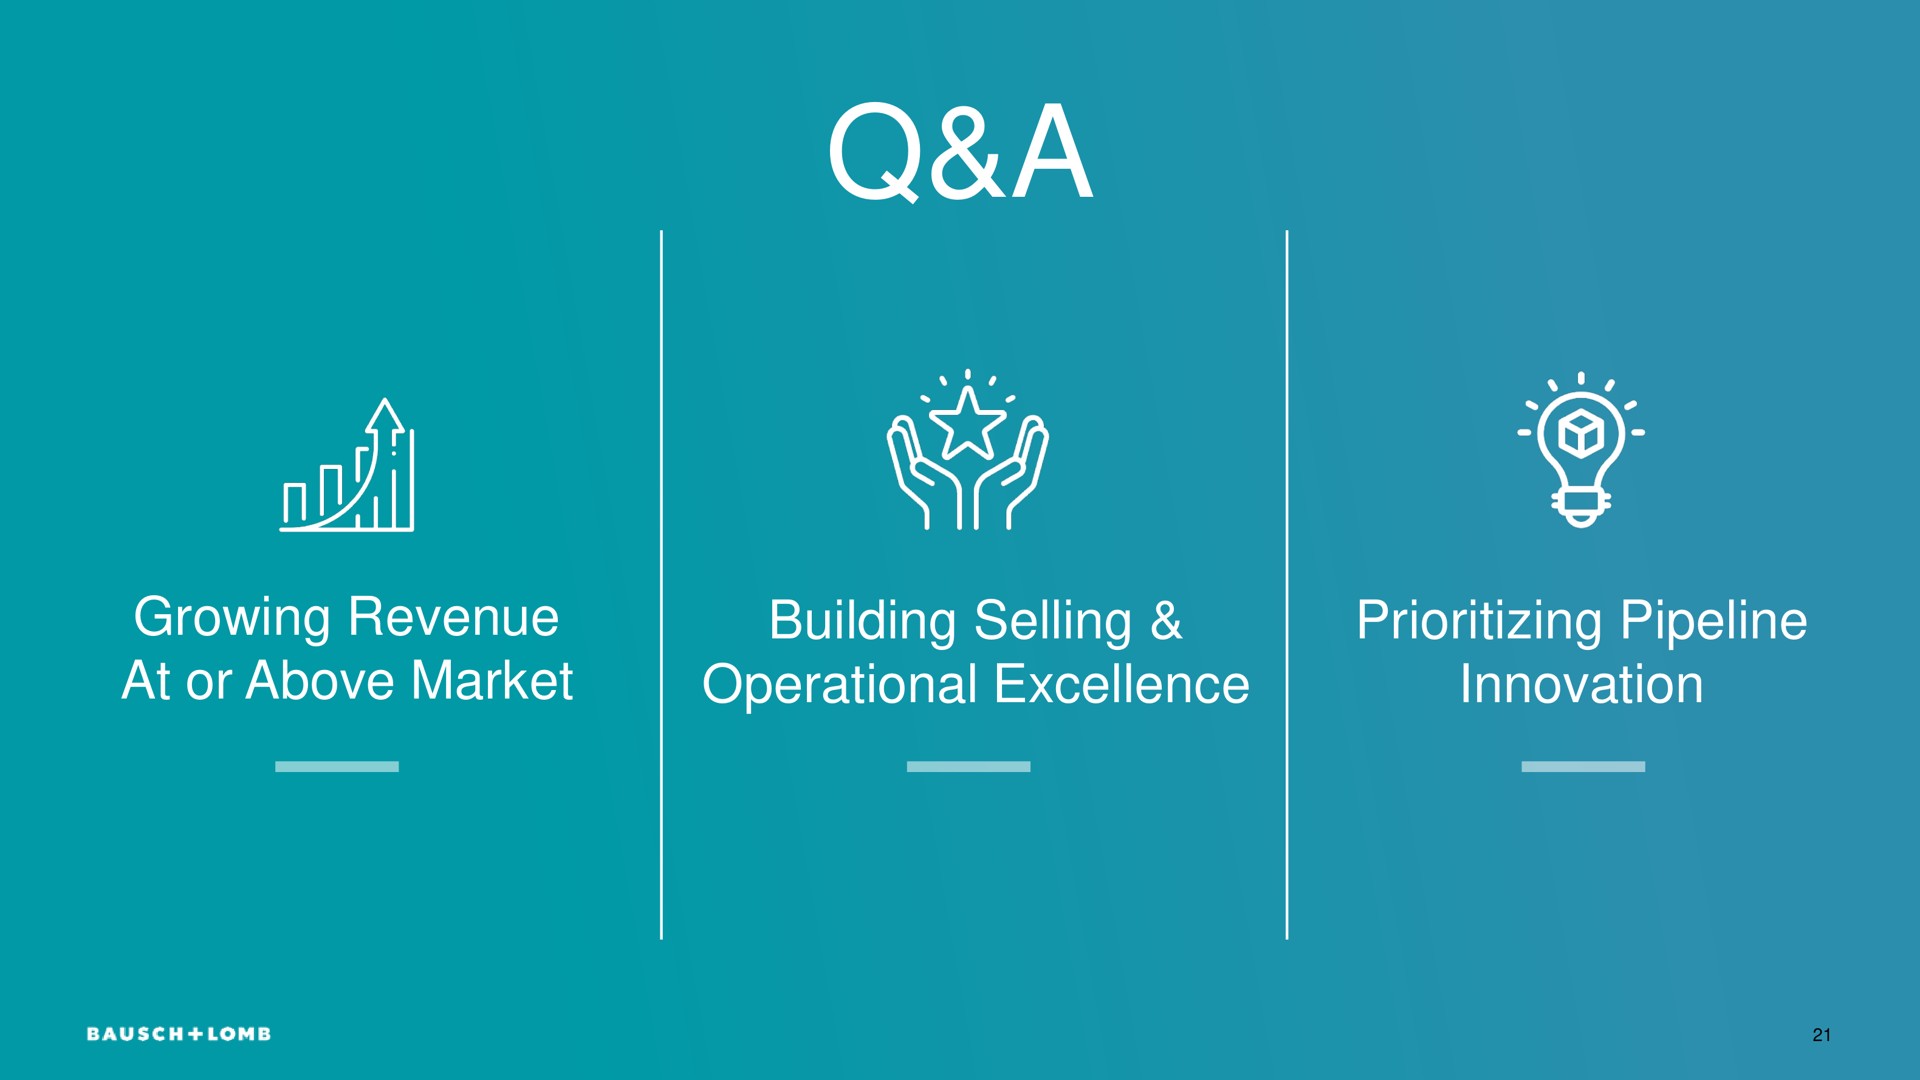 a we at or above market operational excellence innovation | Bausch+Lomb